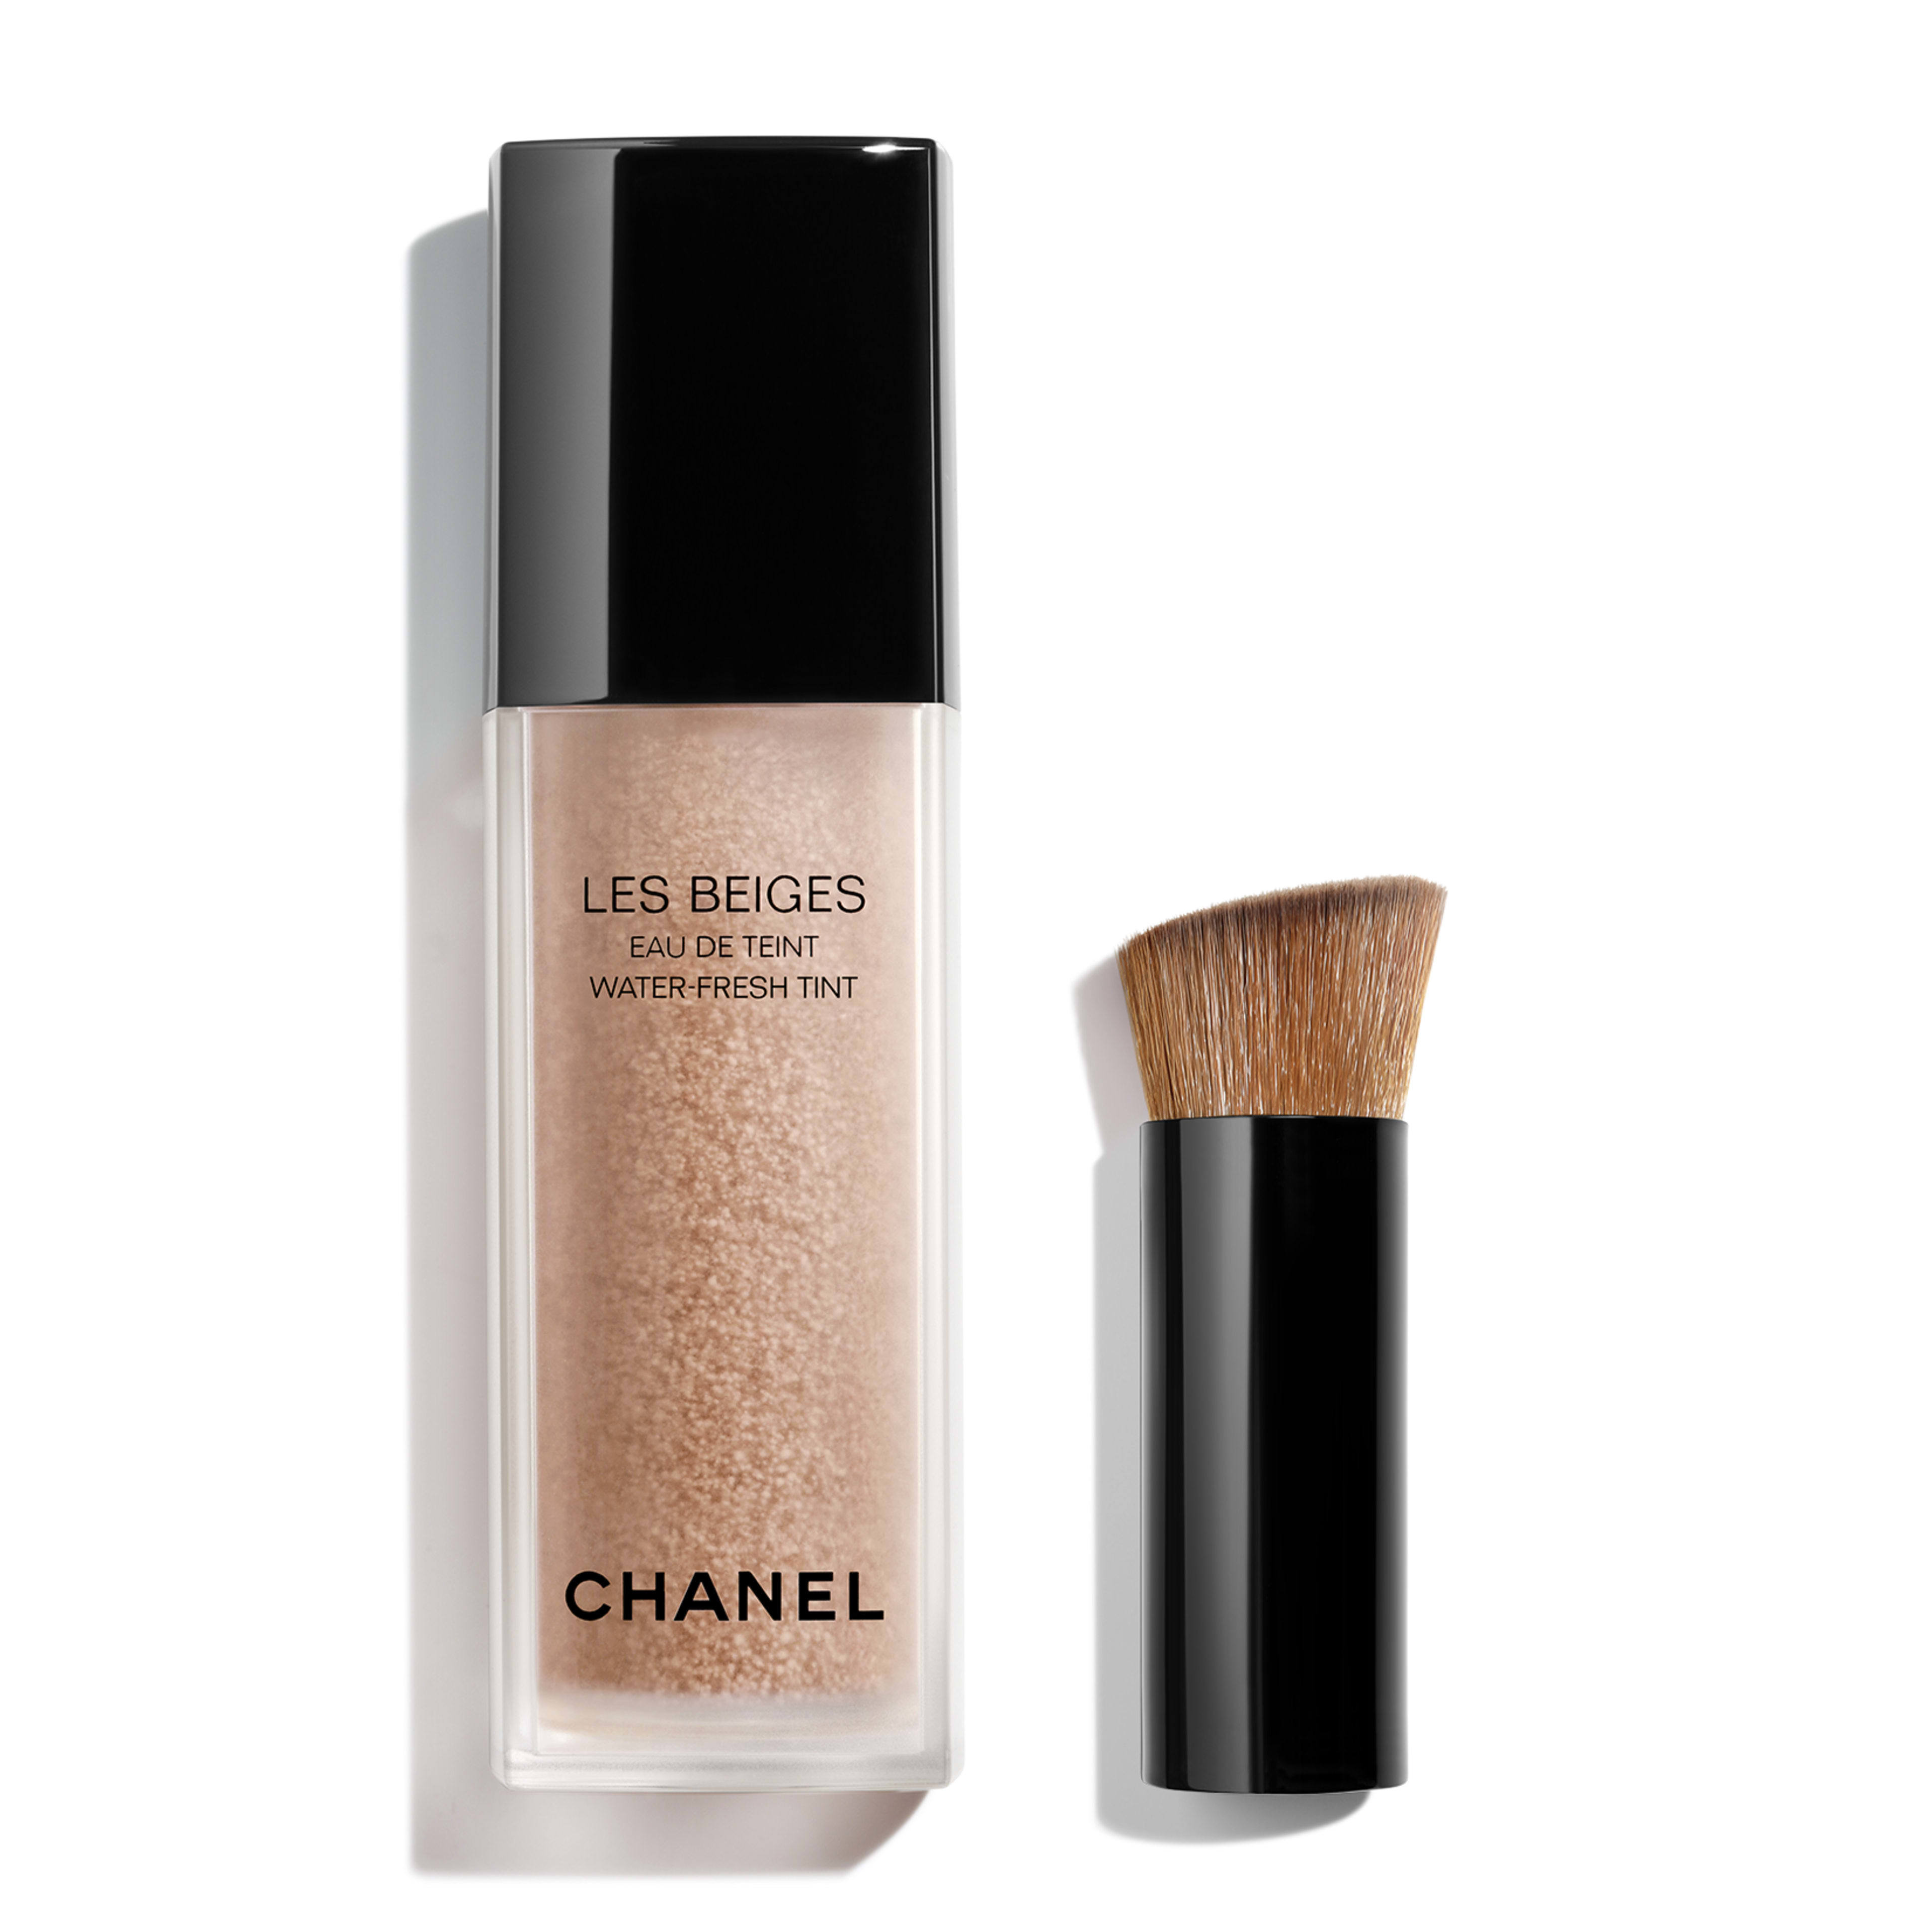 Chanel Les Beiges Water Fresh Tint Light